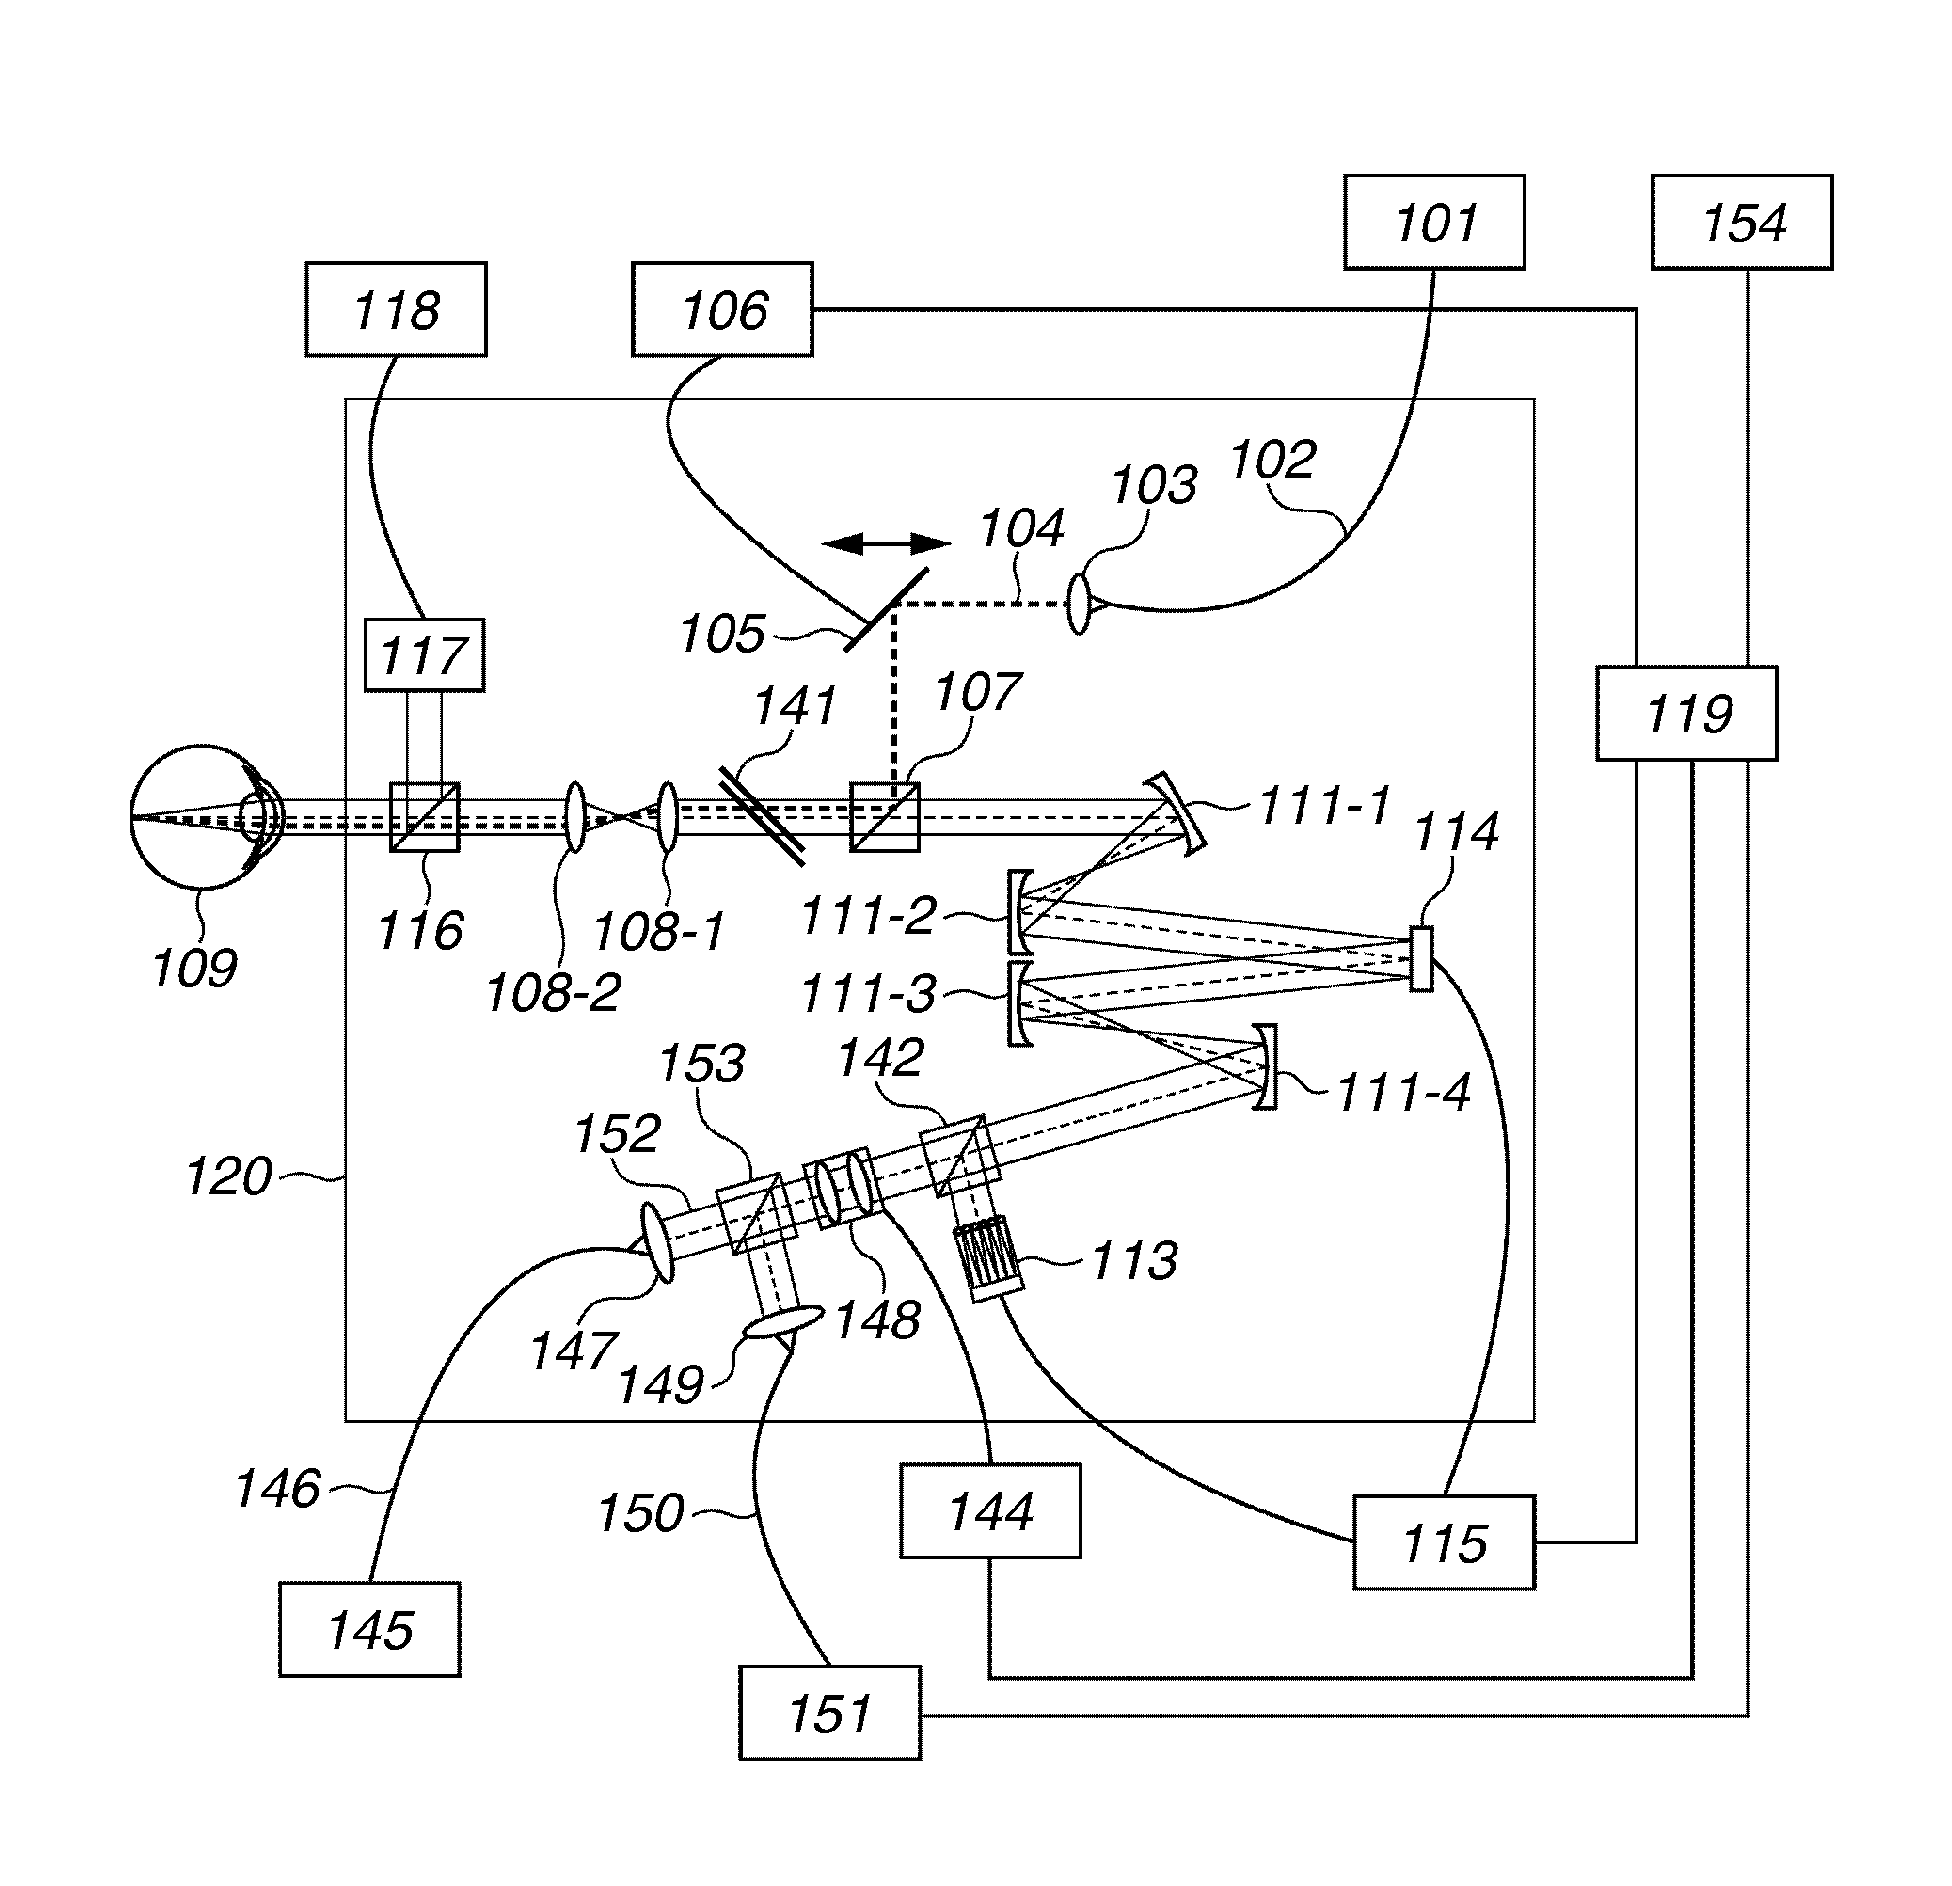 Ophthalmologic apparatus and method for controlling the same